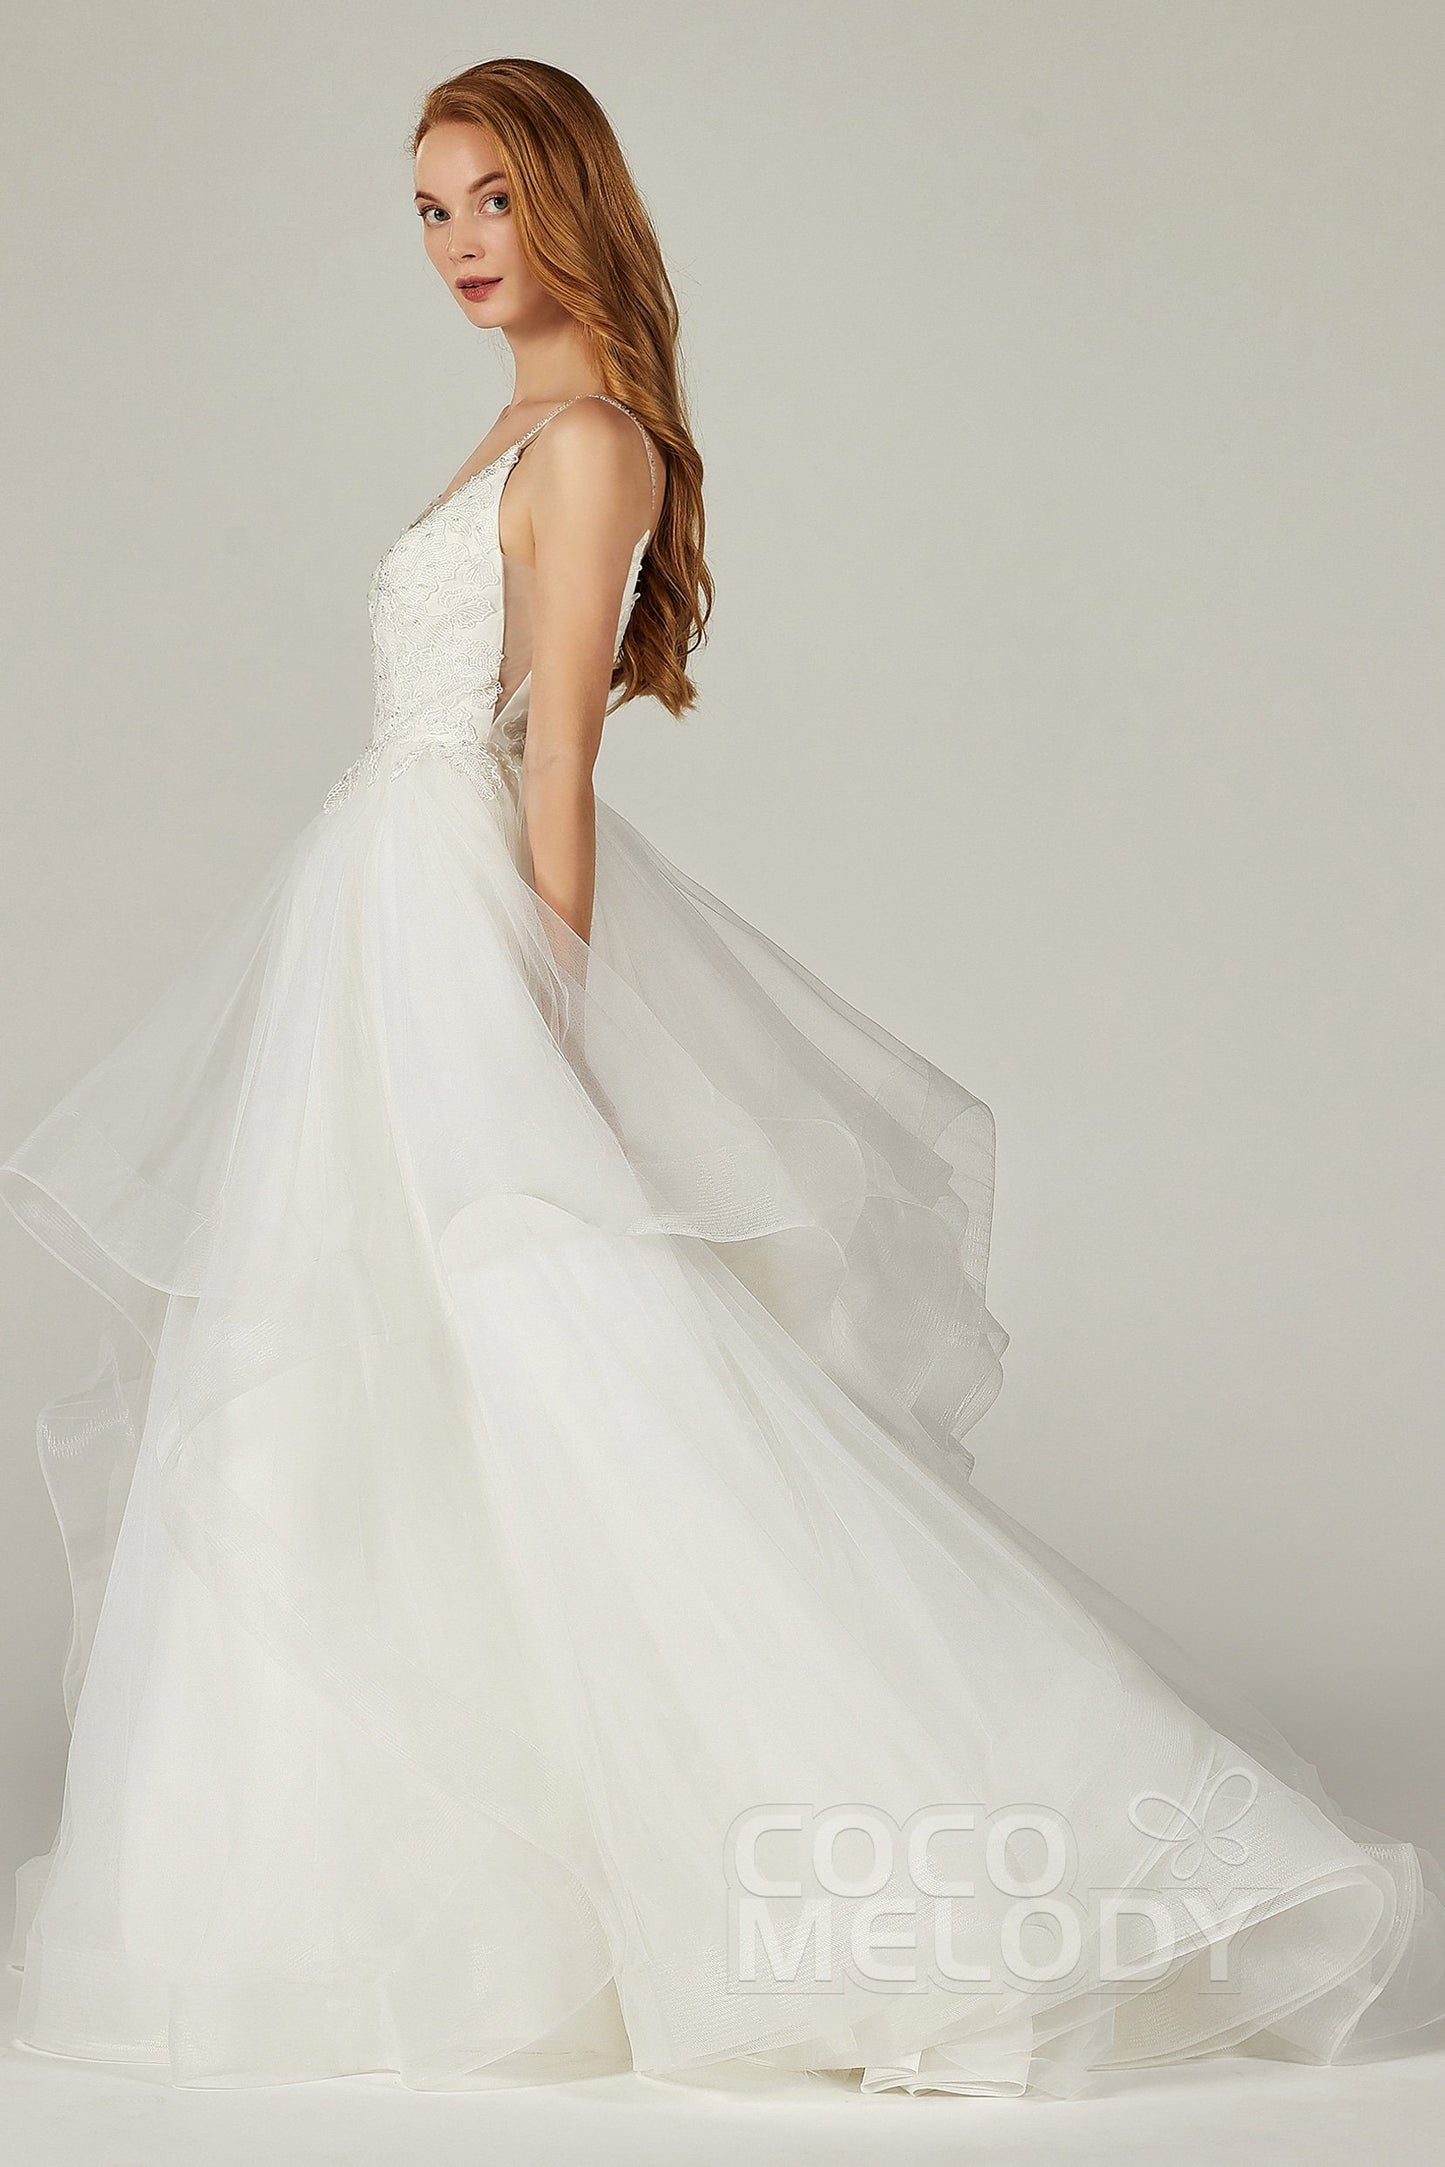 A-Line Court Train Tulle Wedding Dress CW2269